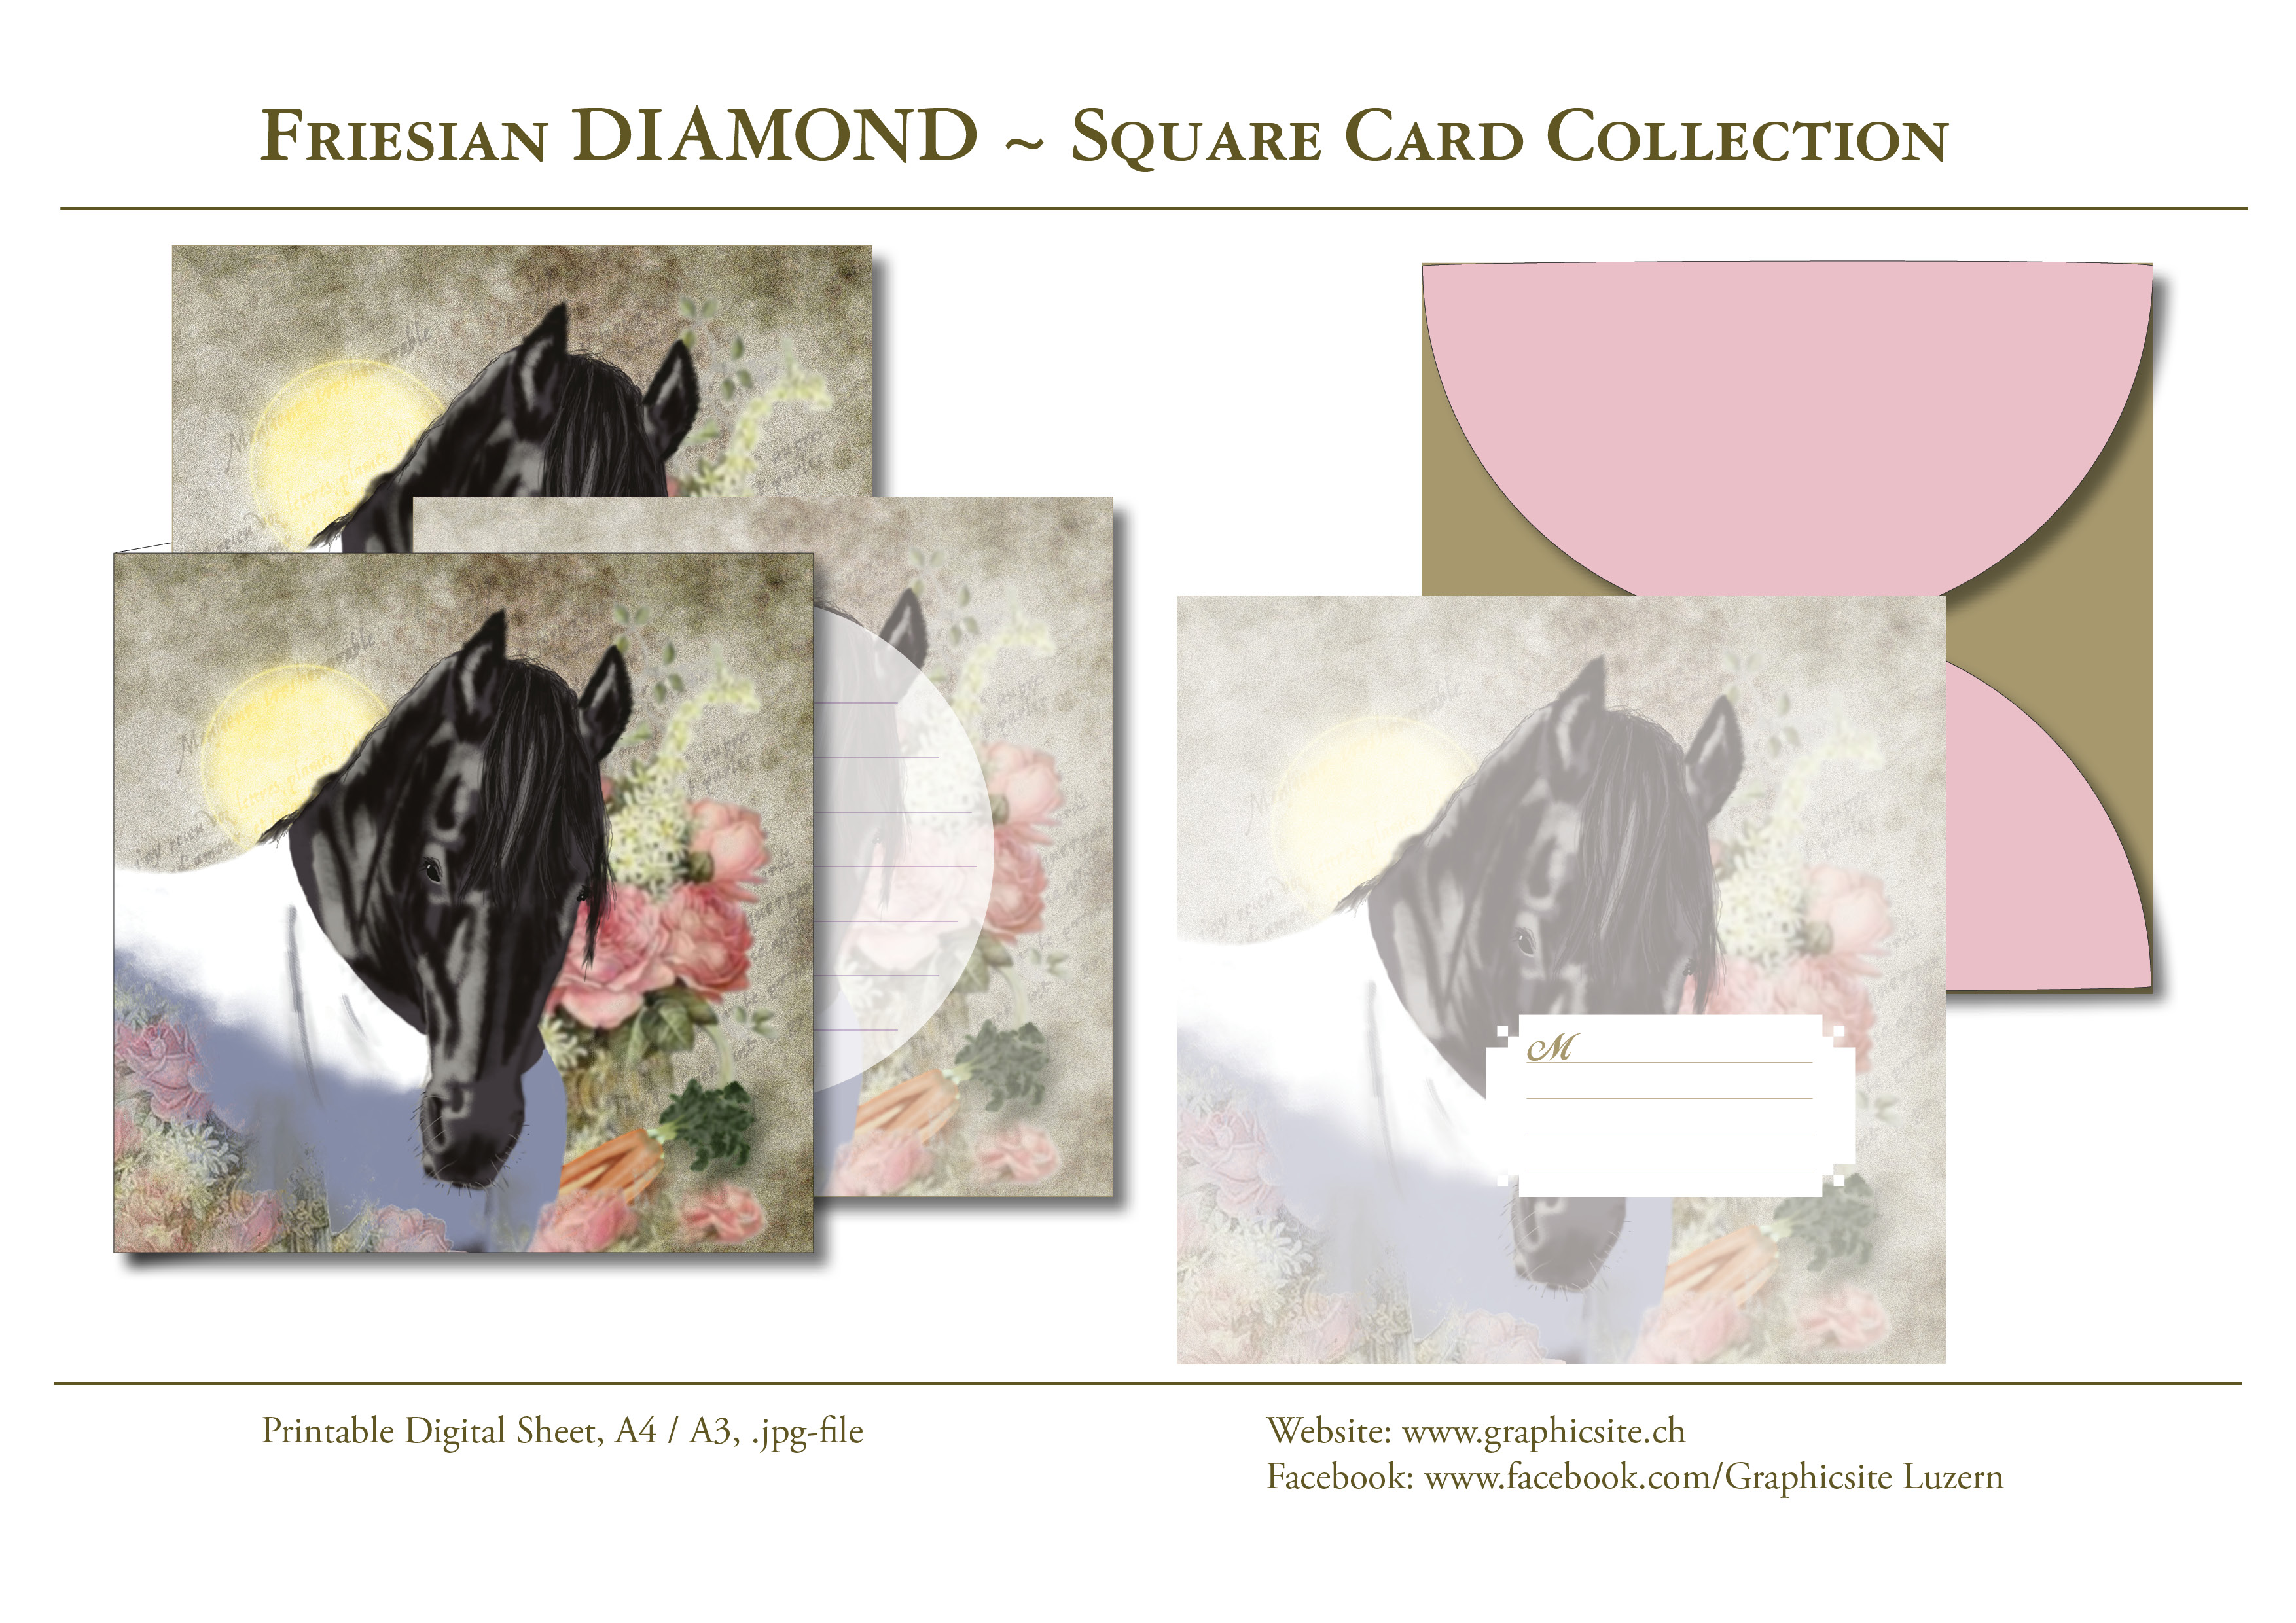 Printable Digital Sheets - Square Card Collection - Friesian DIAMOND - Friesian Horse, horses, digital painting, greeting cards, stationary, graphic design, Luzern,